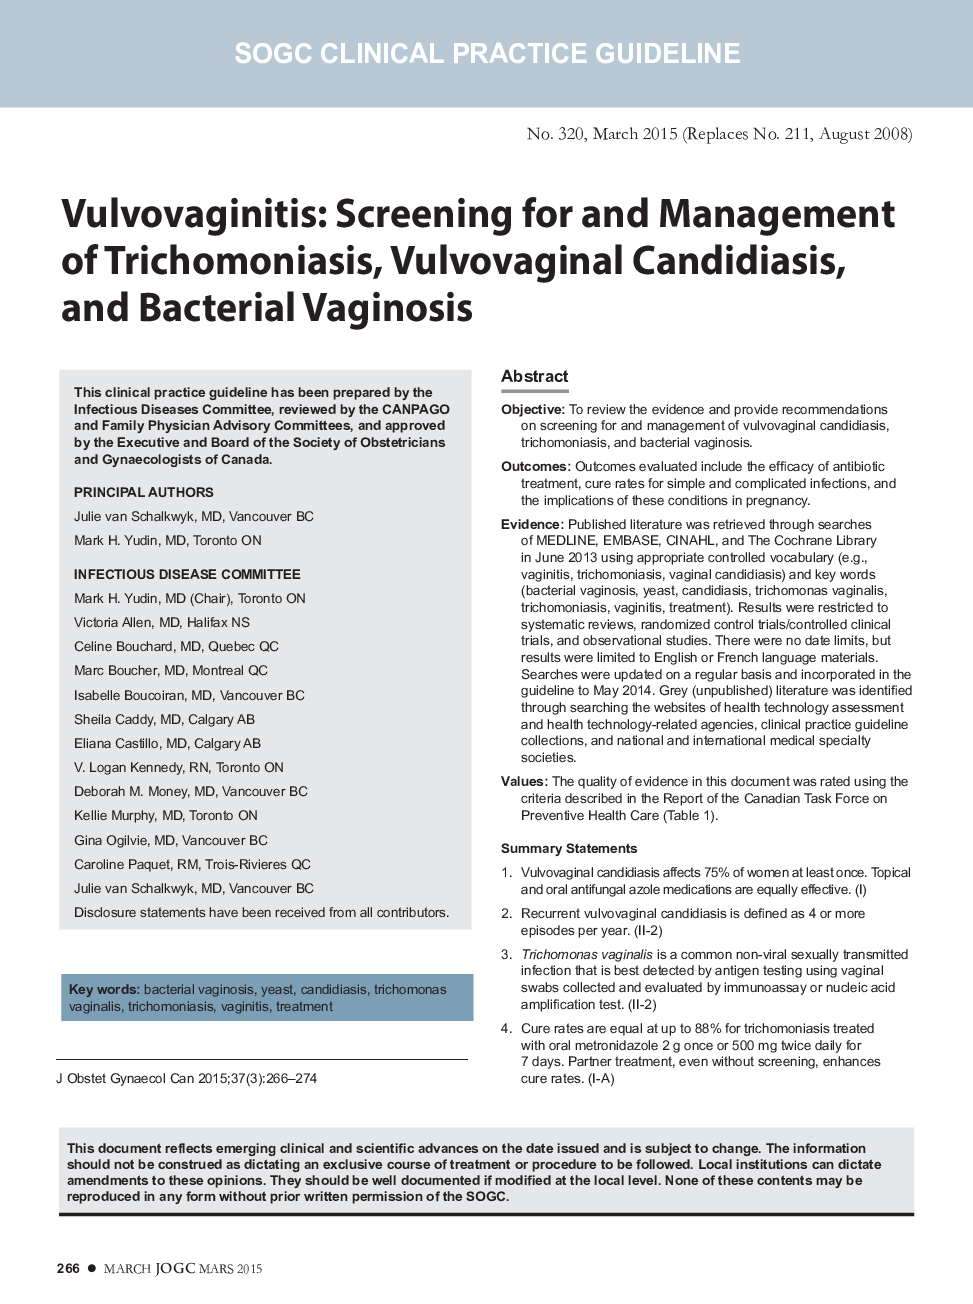 Vulvovaginitis: Screening for and Management of Trichomoniasis, Vulvovaginal Candidiasis, and Bacterial Vaginosis